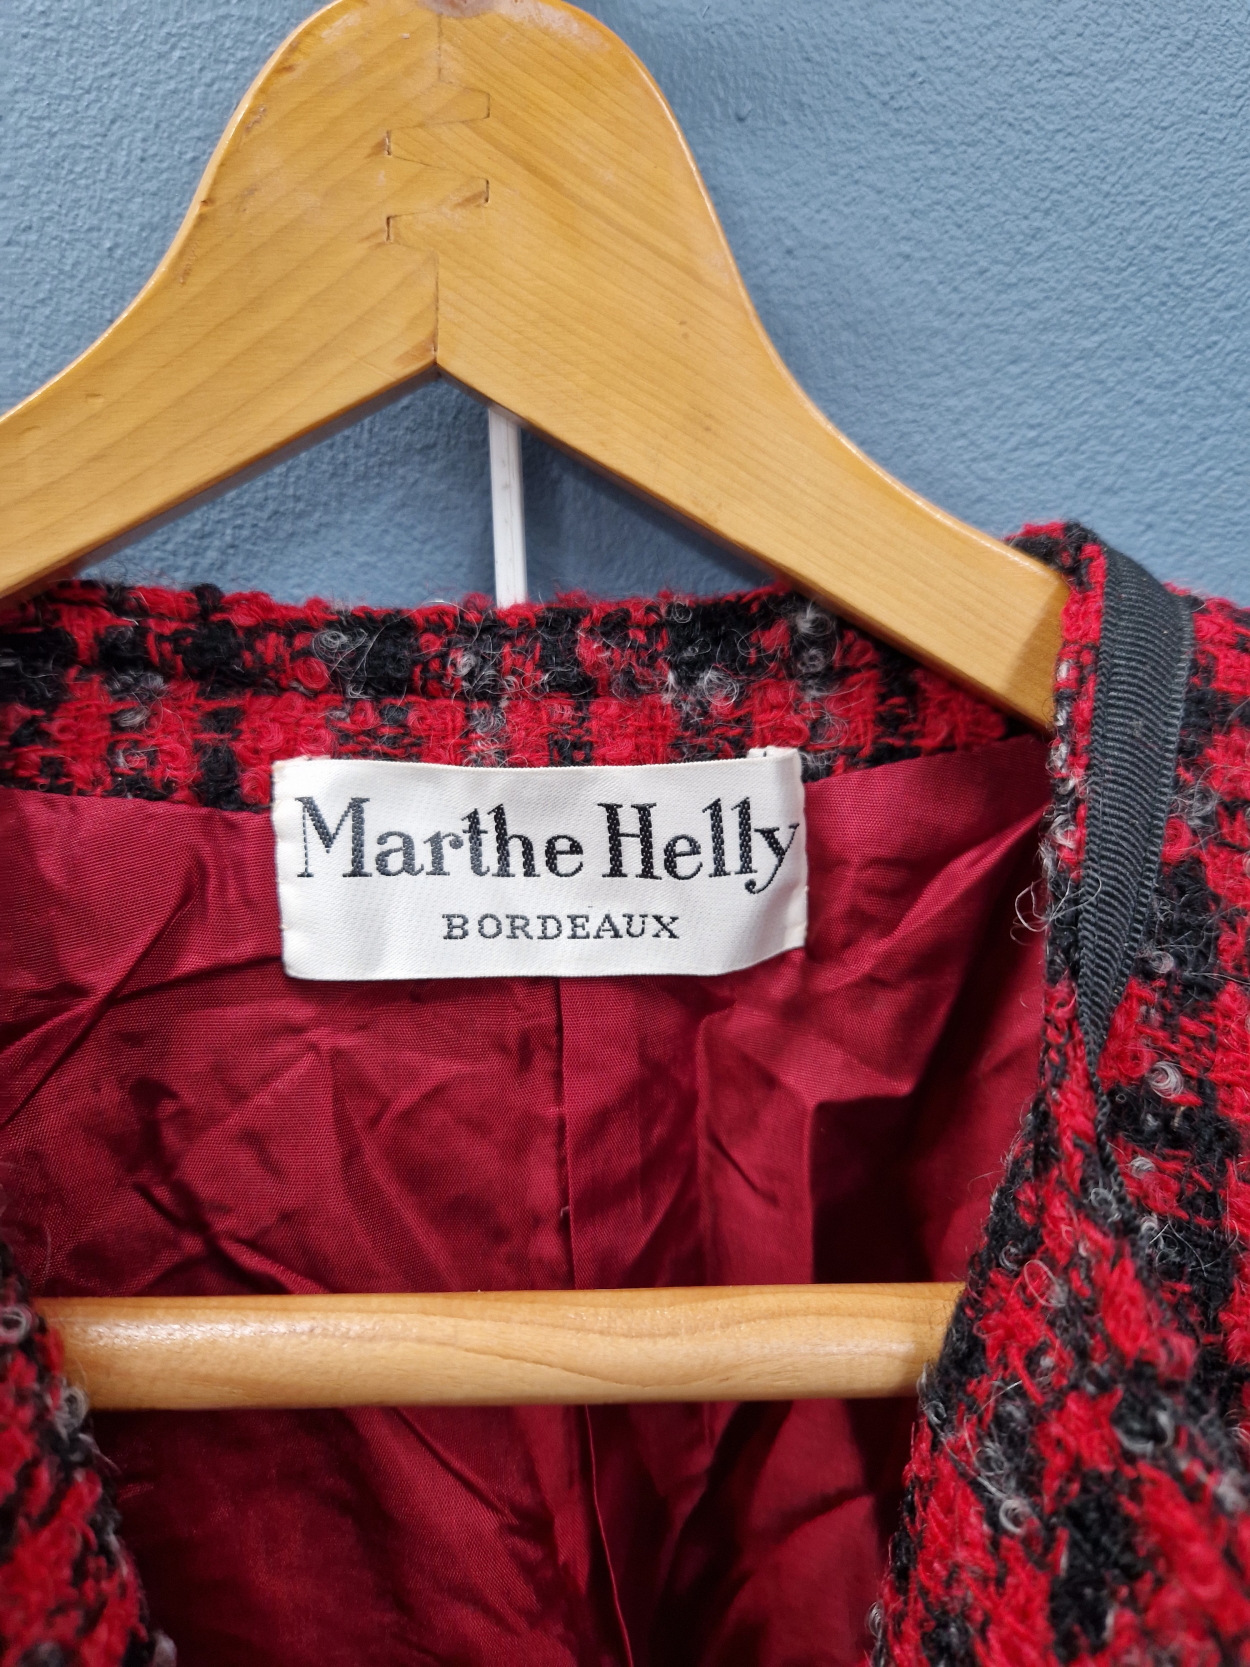 LADIES SUIT. MARTHE HELLY. BORDEAUX. A TWO PART JACKET AND SKIRT SUITE, BLACK AND RED CHECK. - Image 2 of 7